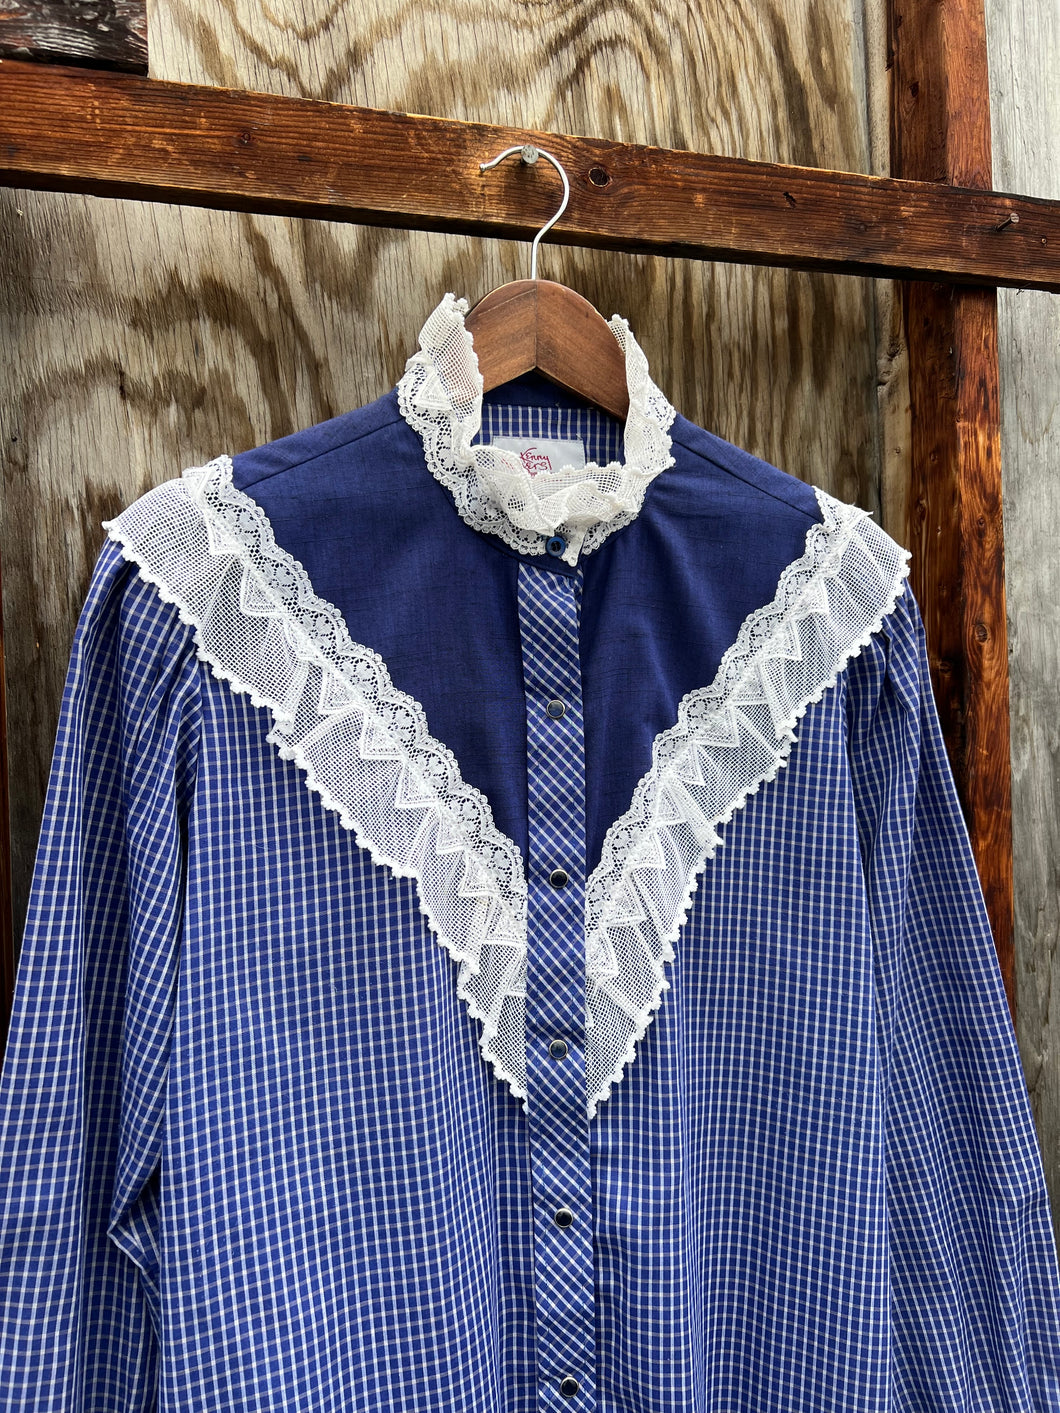 Vintage Kenny Rogers Womens Lace Shirt (WM, see measurements)